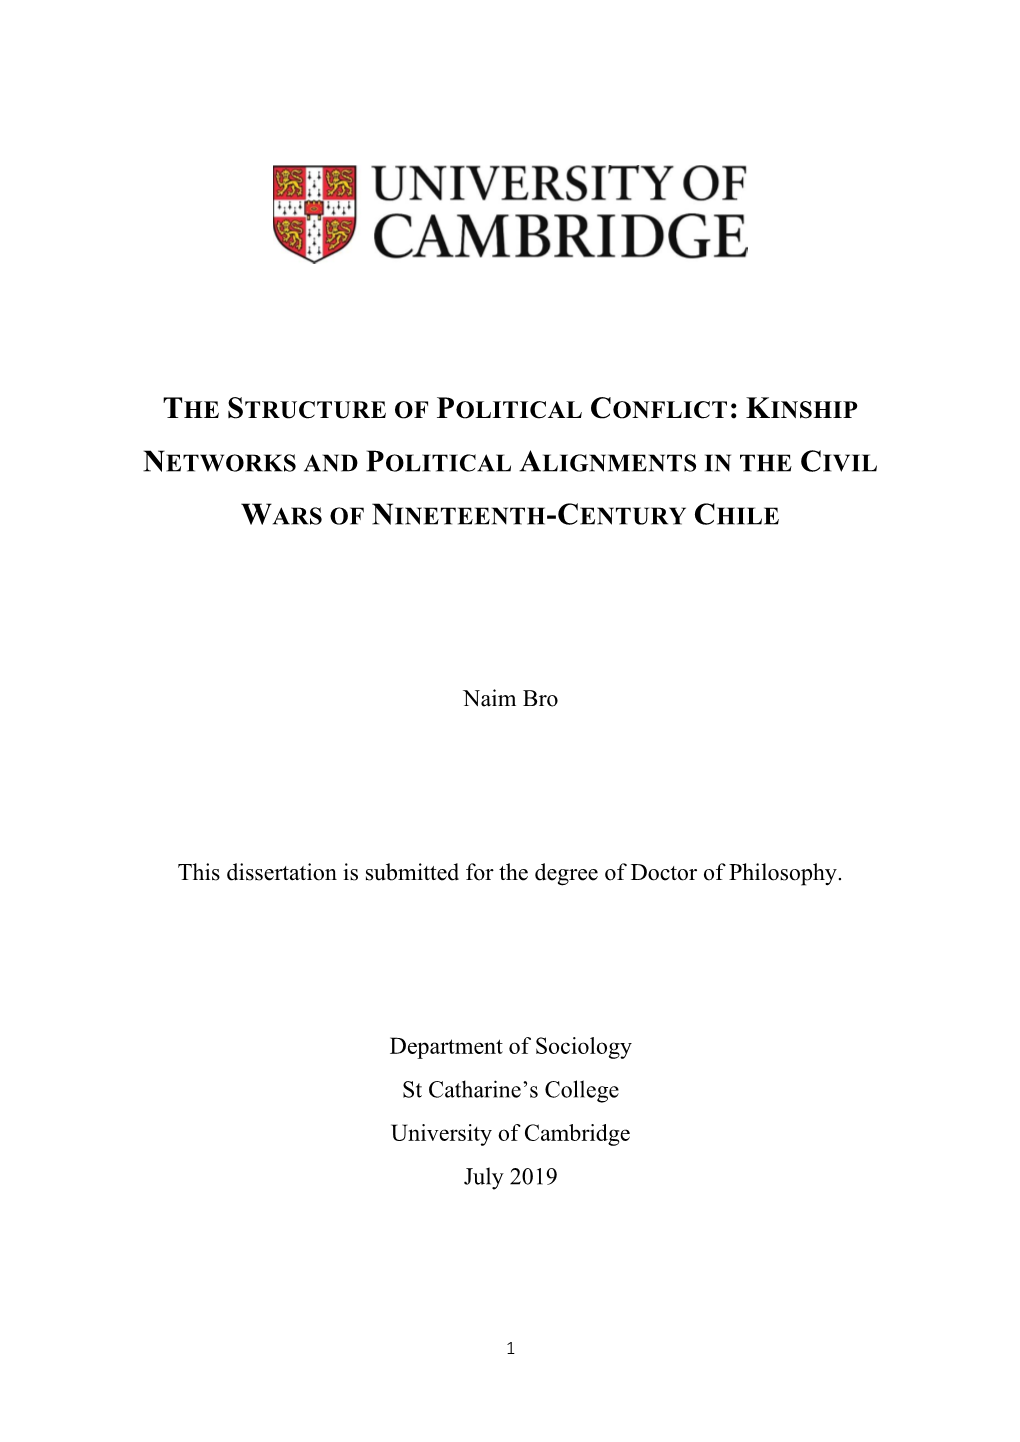 The Structure of Political Conflict: Kinship Networks and Political Alignments in the Civil Wars of Nineteenth-Century Chile